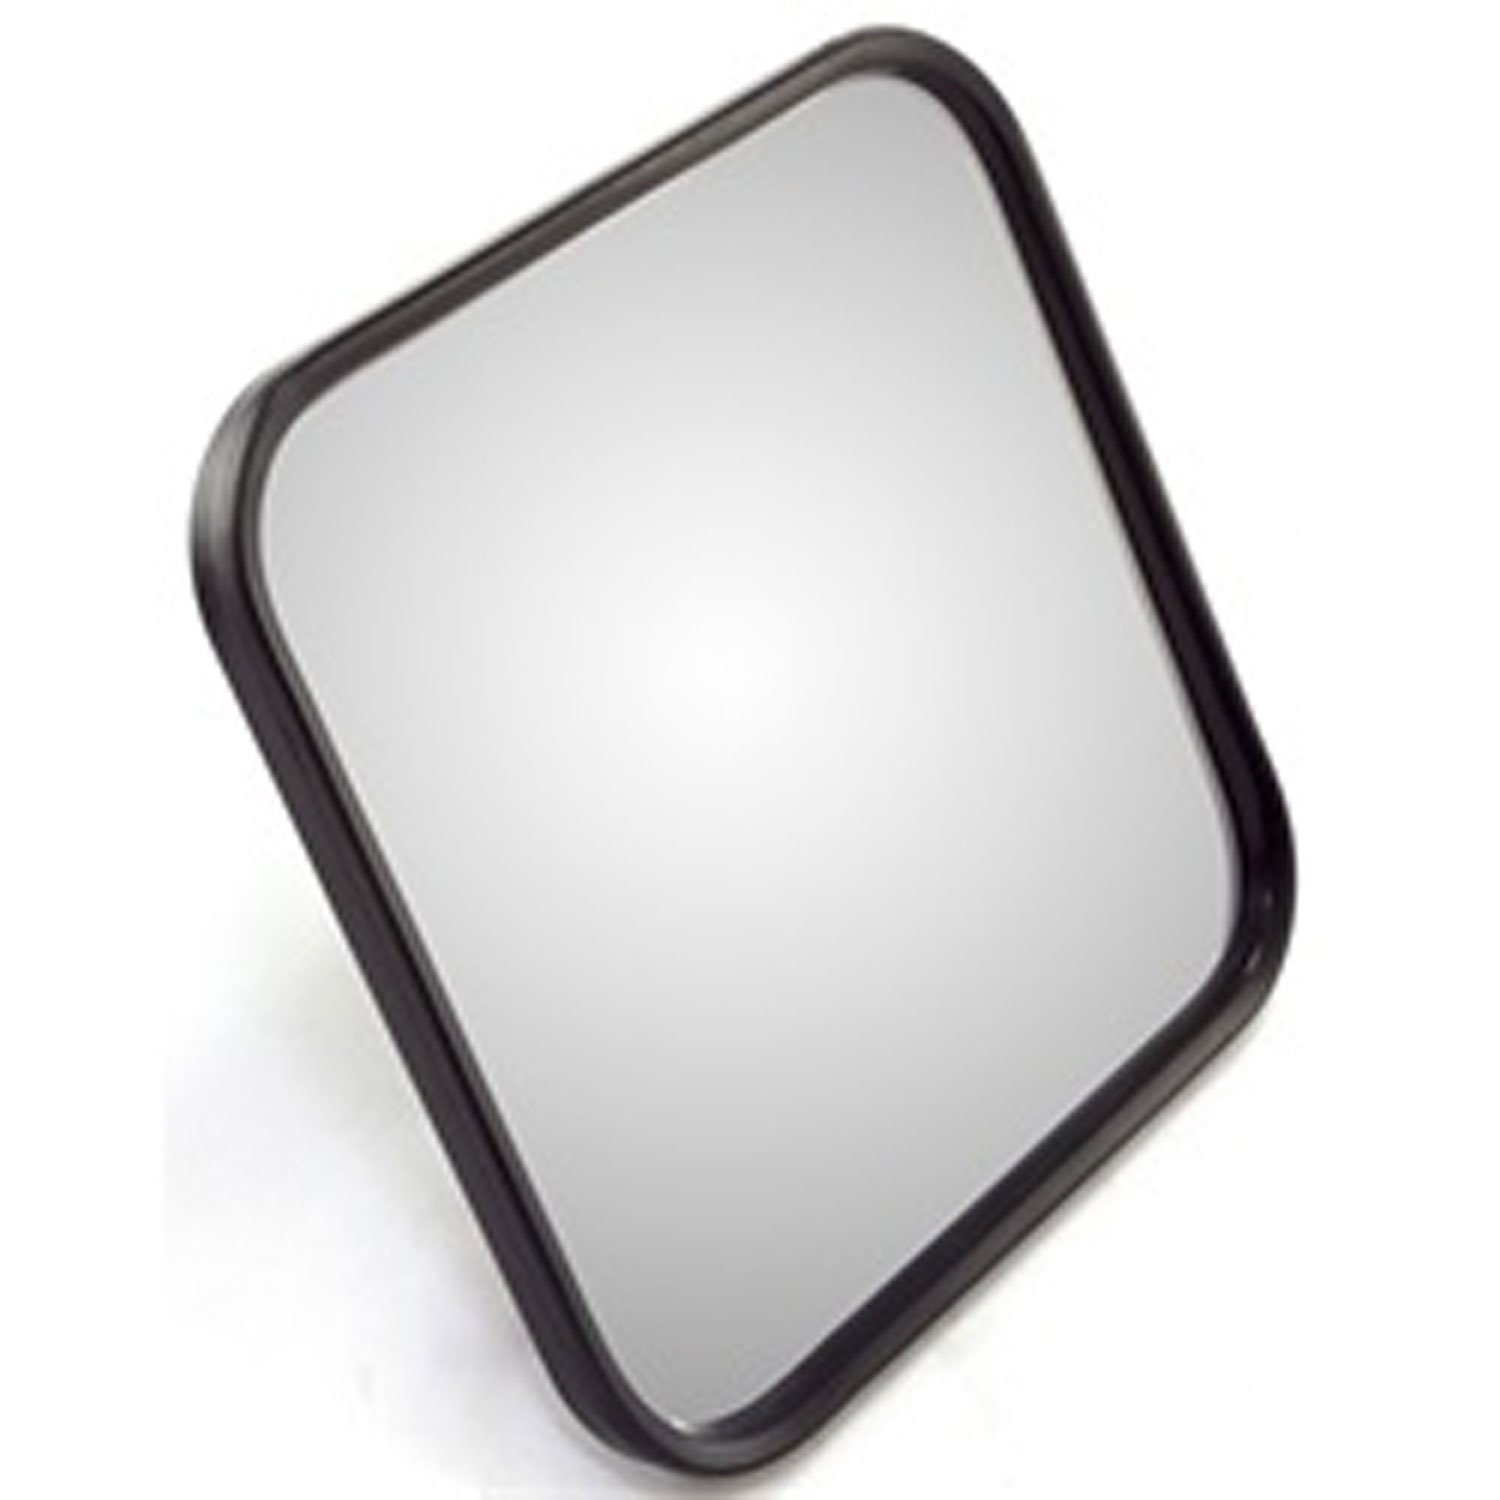 Black narrow replacement mirror head from Omix-ADA, Fits